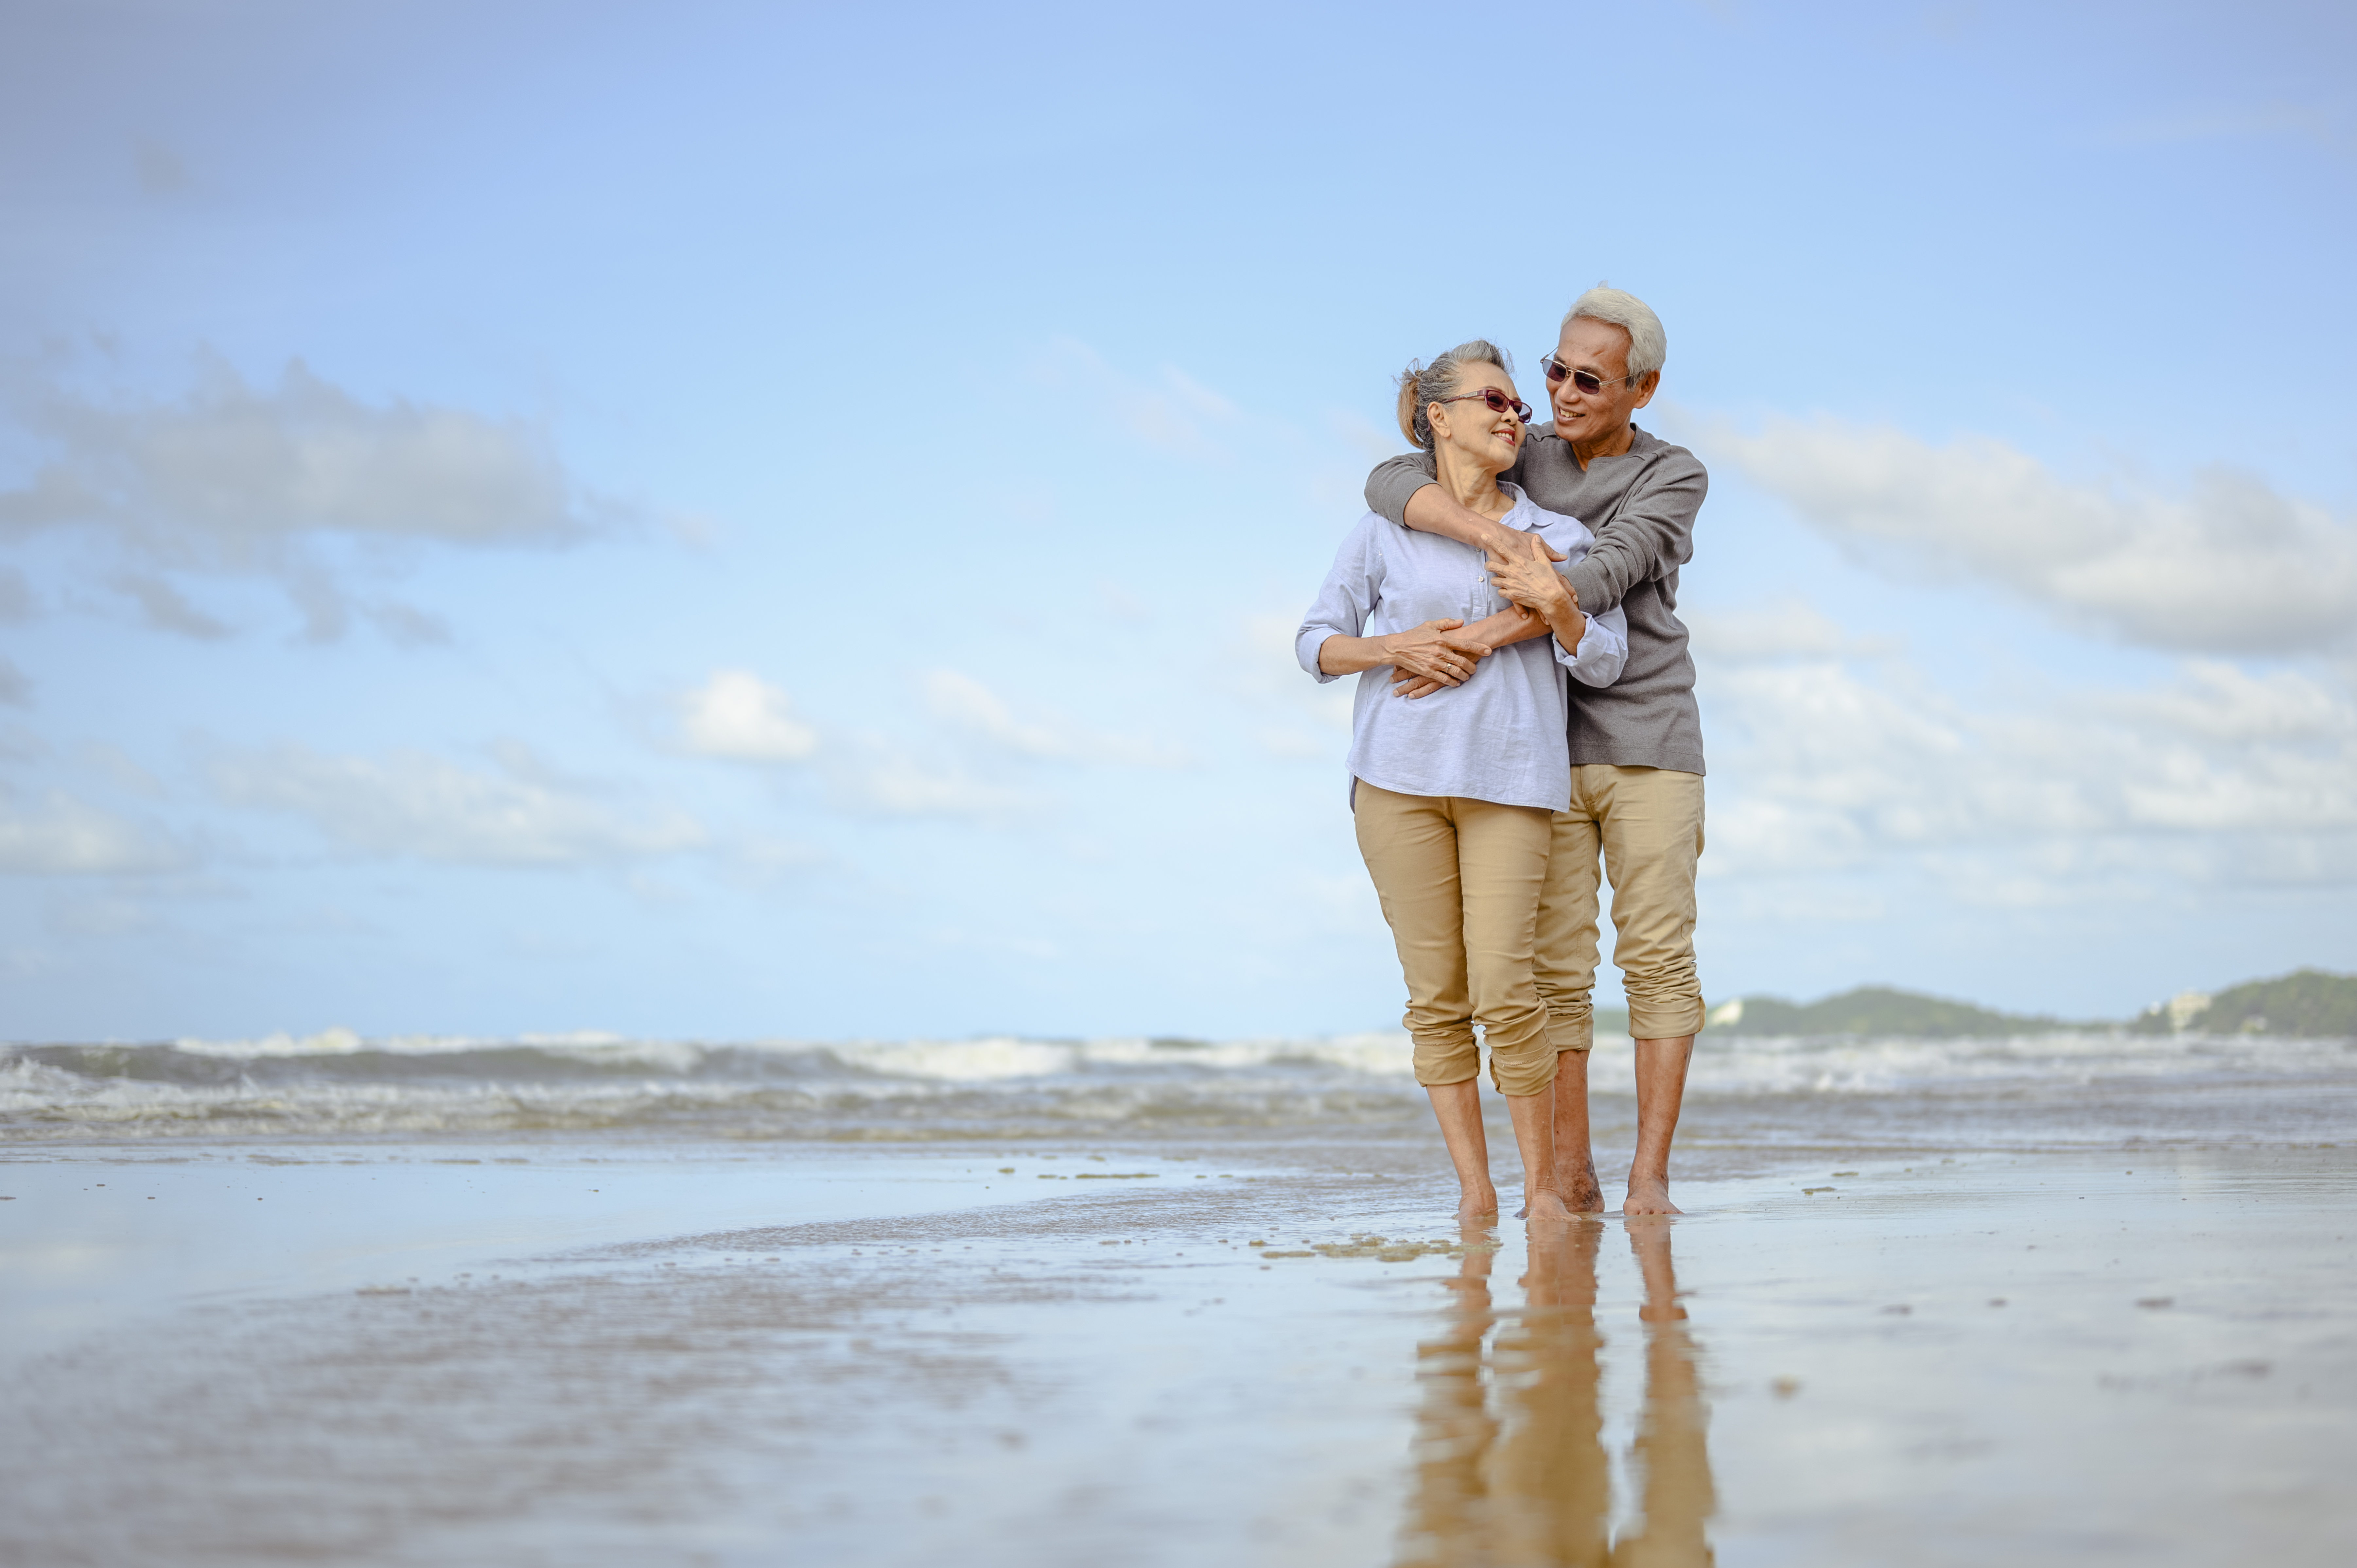 Senior couples embrace on the beach at sunny day, plan life insurance